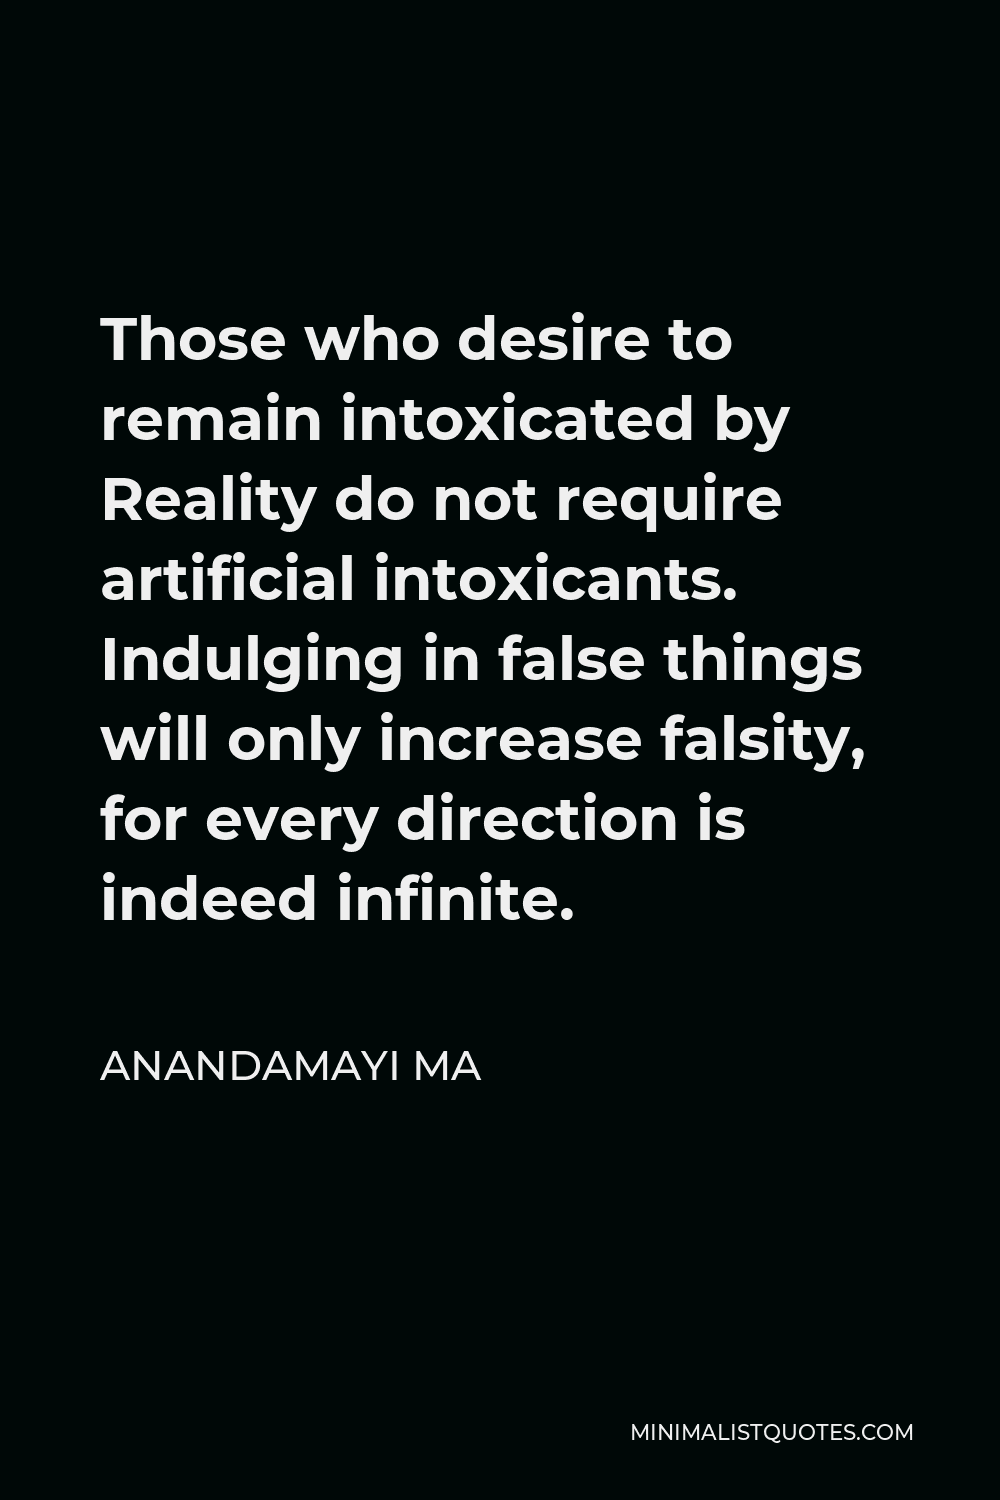 Anandamayi Ma Quote - Those who desire to remain intoxicated by Reality do not require artificial intoxicants. Indulging in false things will only increase falsity, for every direction is indeed infinite.